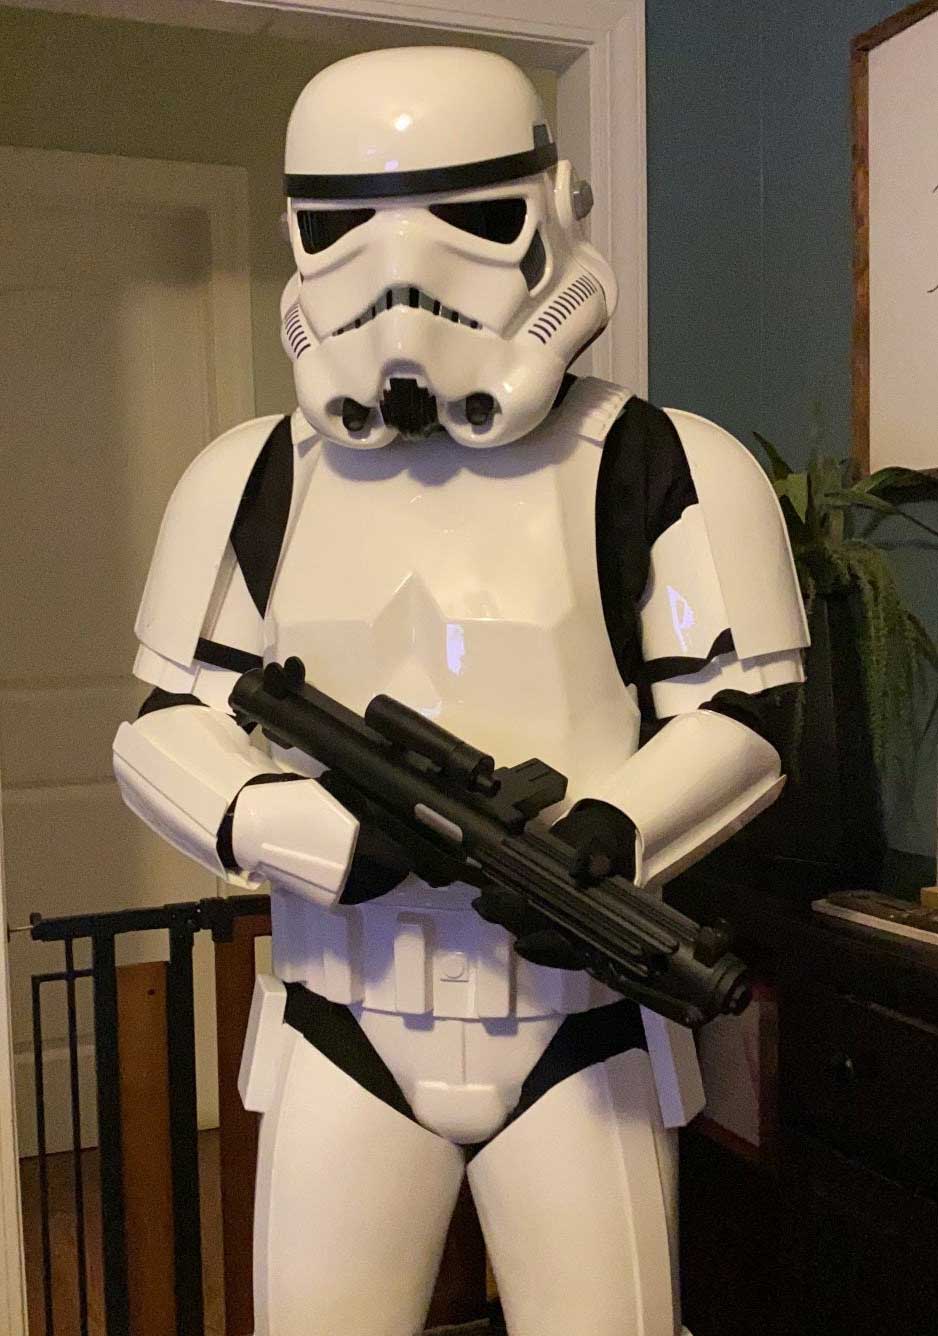 Stormtrooper Armor Review from MJ